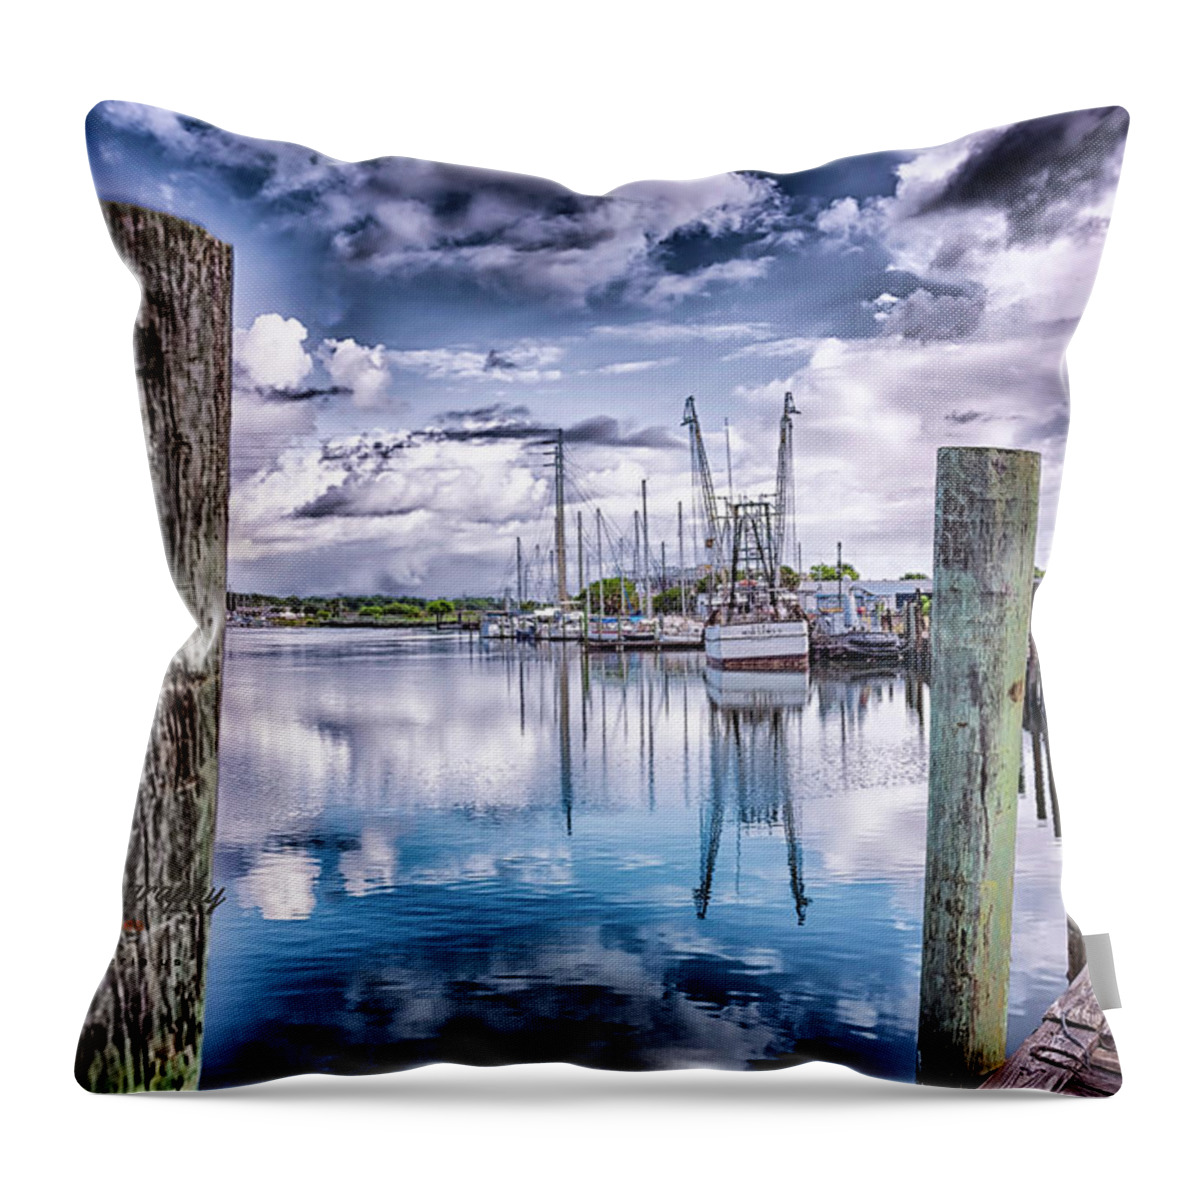 Water Throw Pillow featuring the photograph Fleeting Dawn by Joseph Desiderio